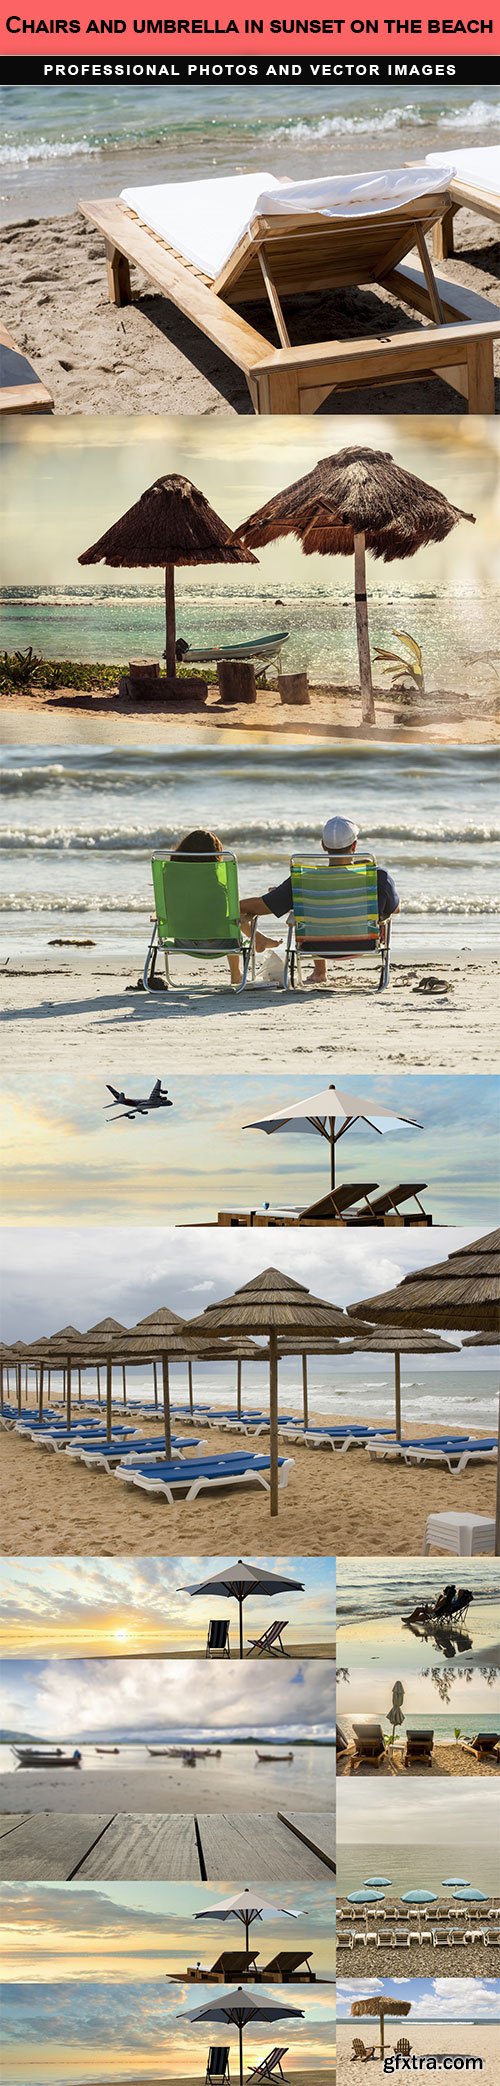 Chairs and umbrella in sunset on the beach